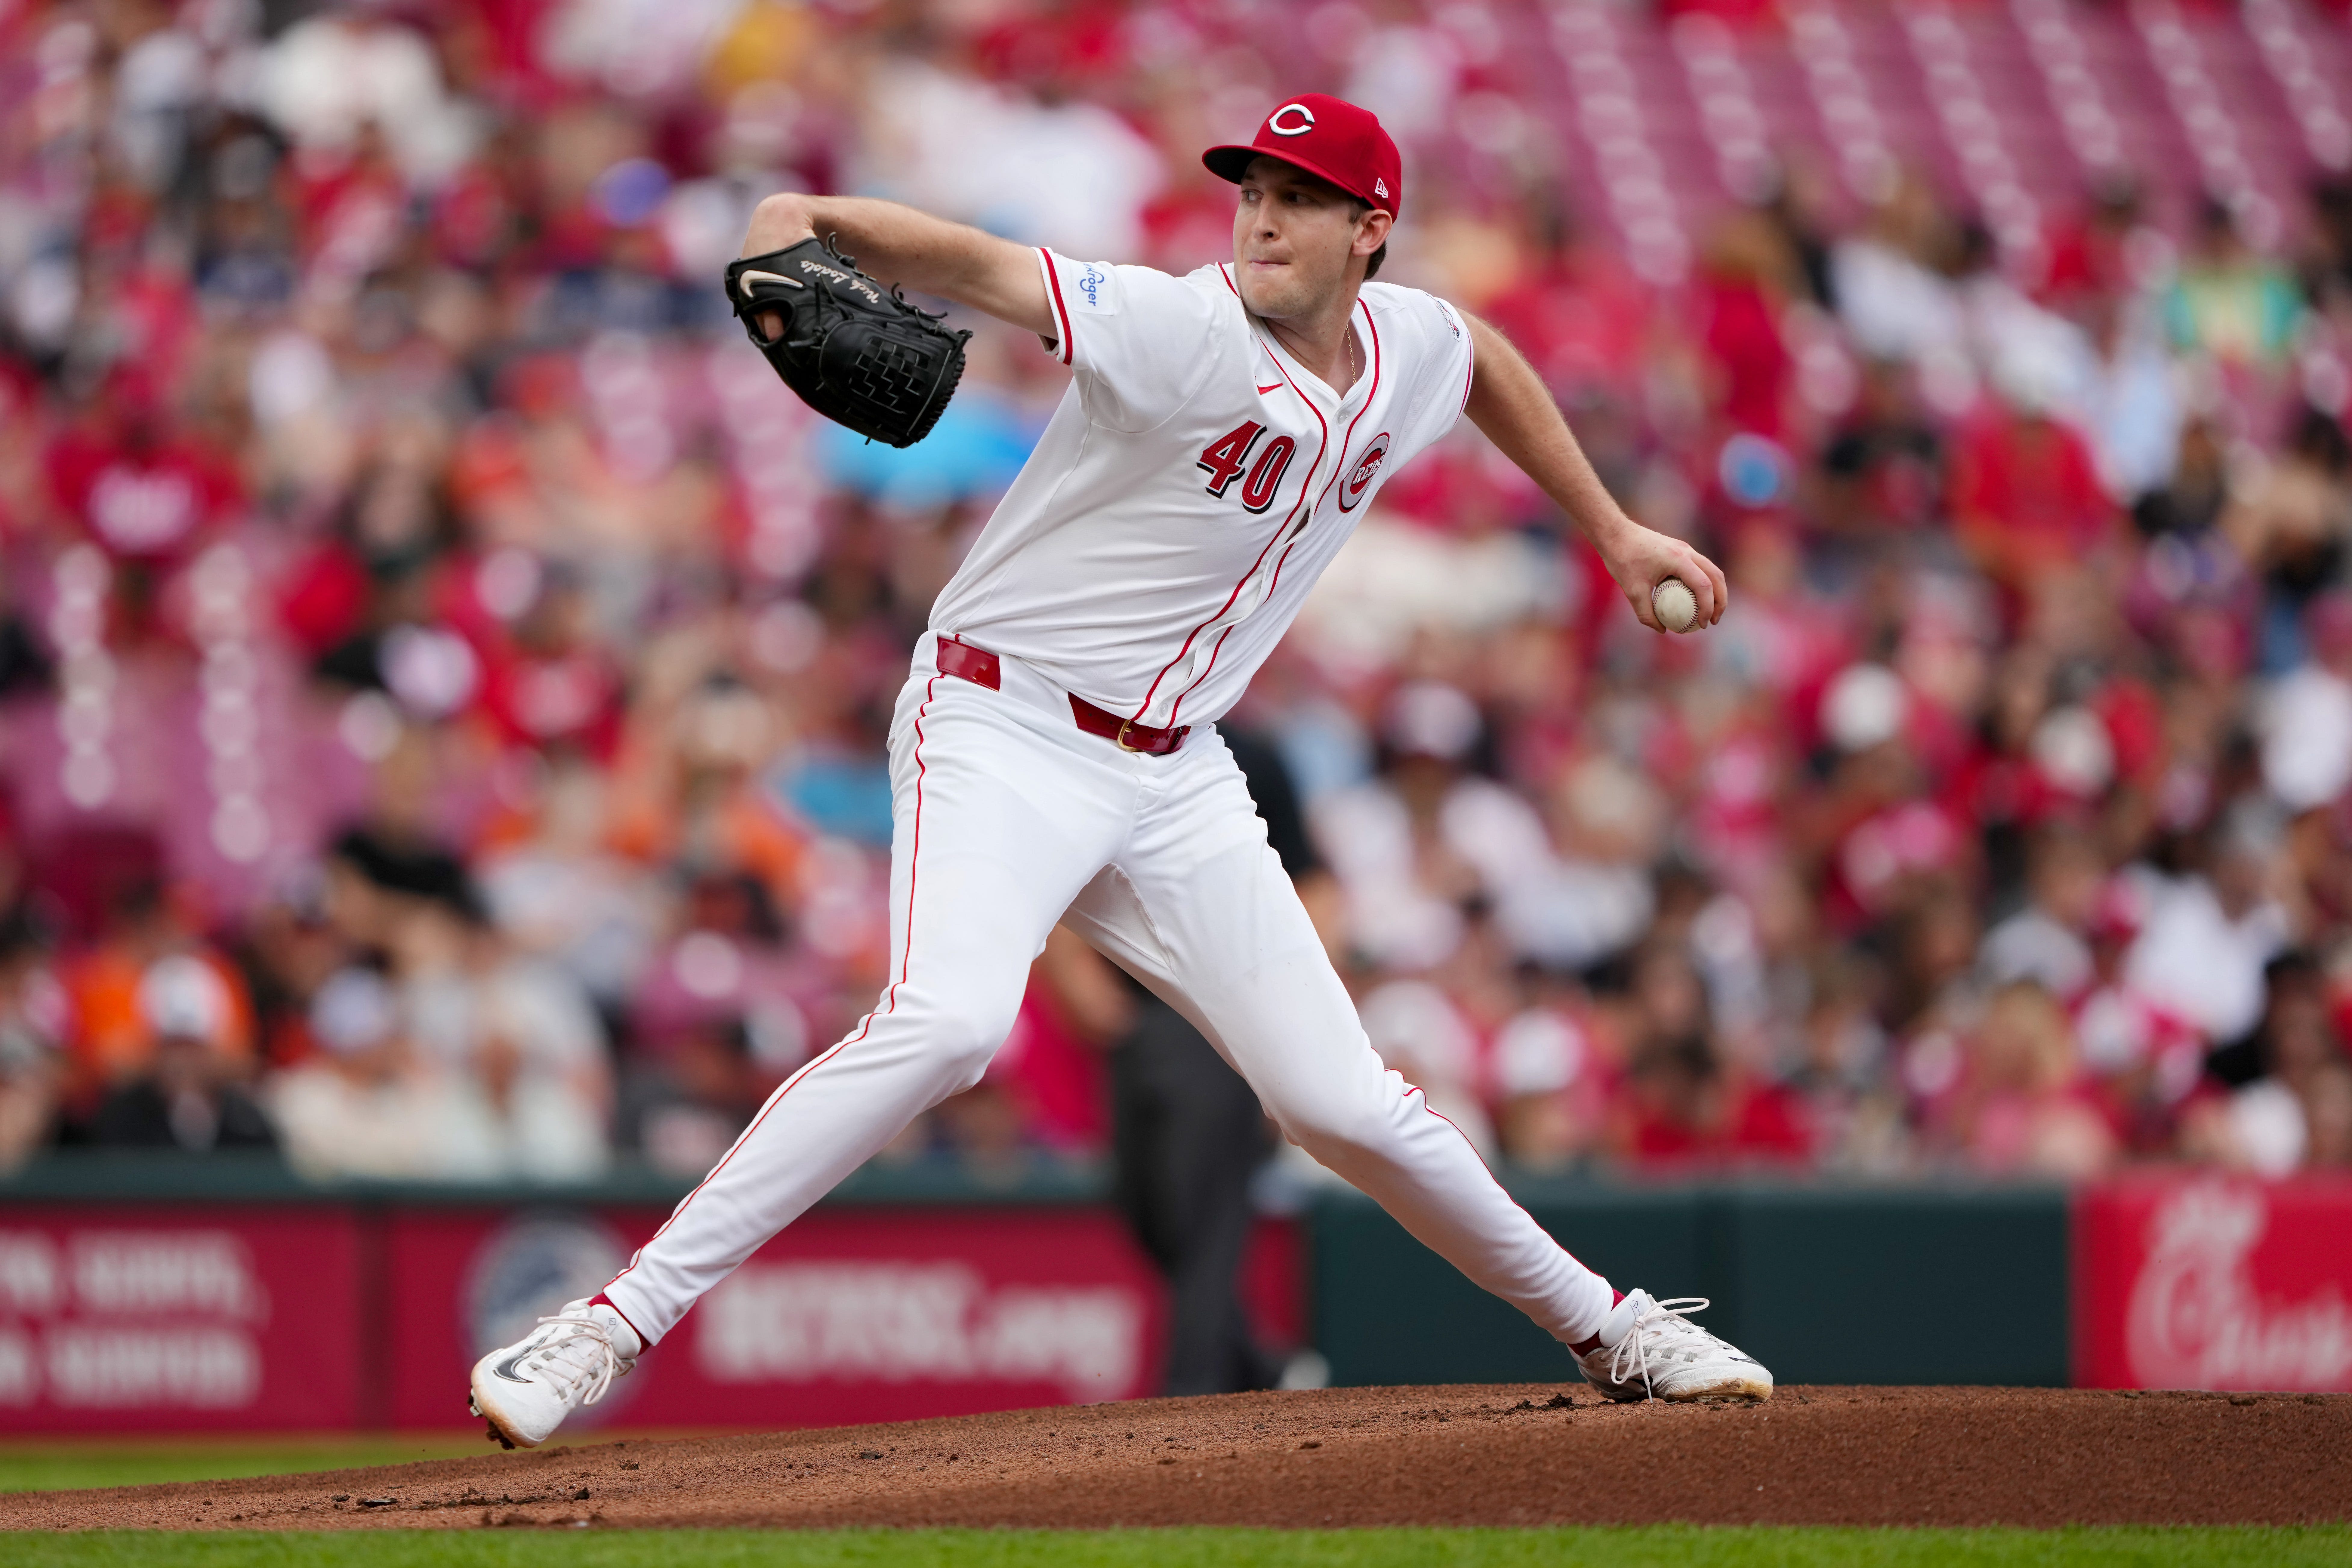 Reds look to build momentum behind Nick Lodolo in Game 2 against Giants